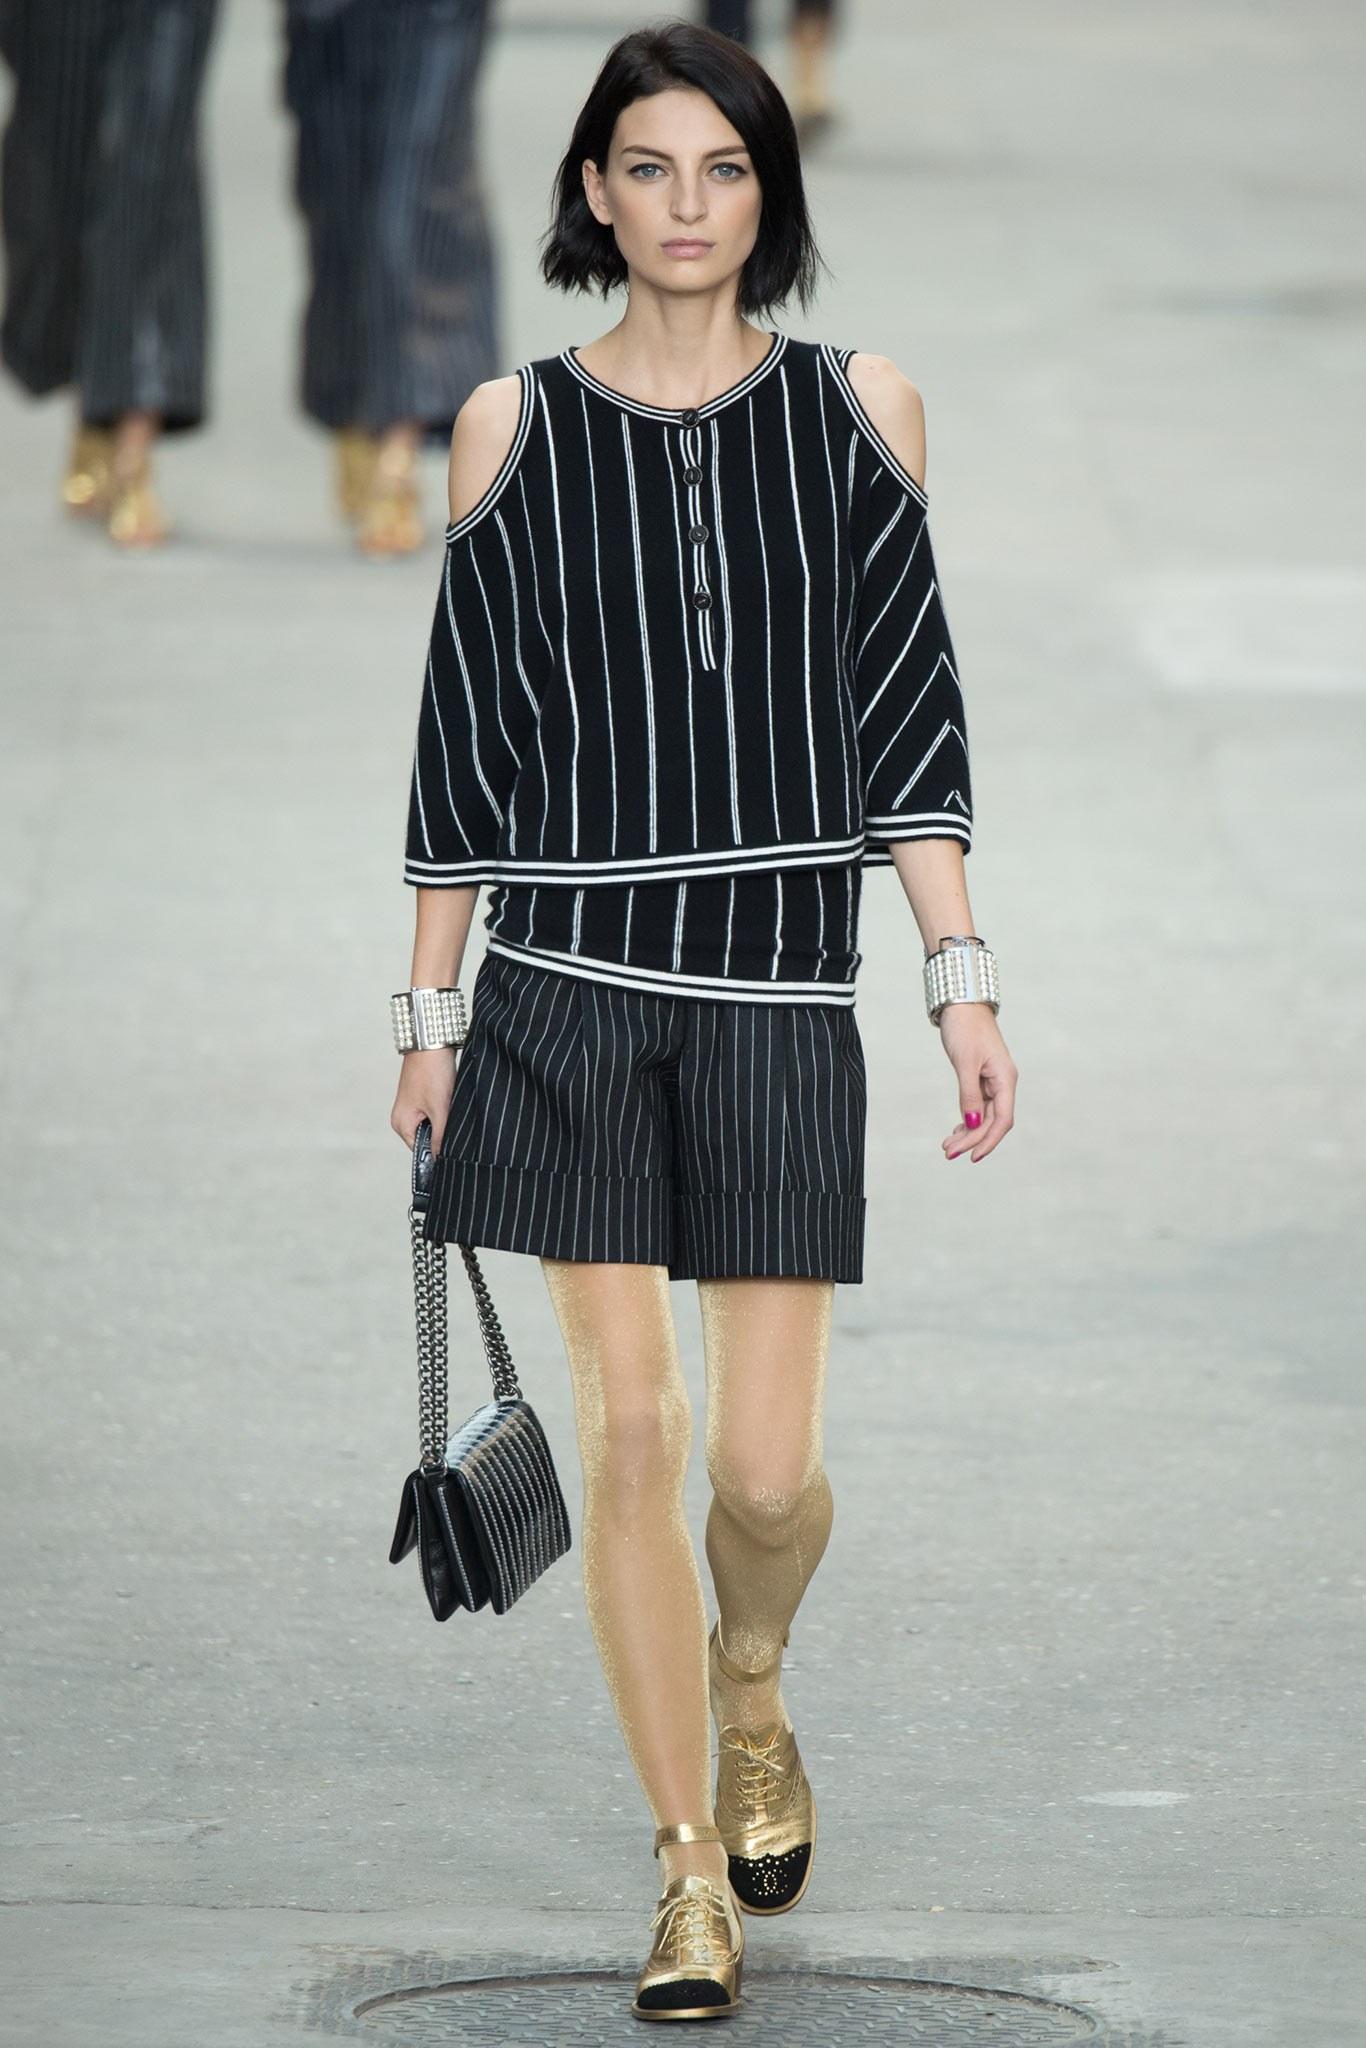 Chanel 2015 Spring Runway Grey Pinstripe High Waist Shorts.  $1950 original retail price.  High waist shorts with side pockets, pleat front, and wide cuffs.  Marked size FR36 (USA 4).  To fit 26” waist, 35” hip,  19” total length.  73% cotton, 25